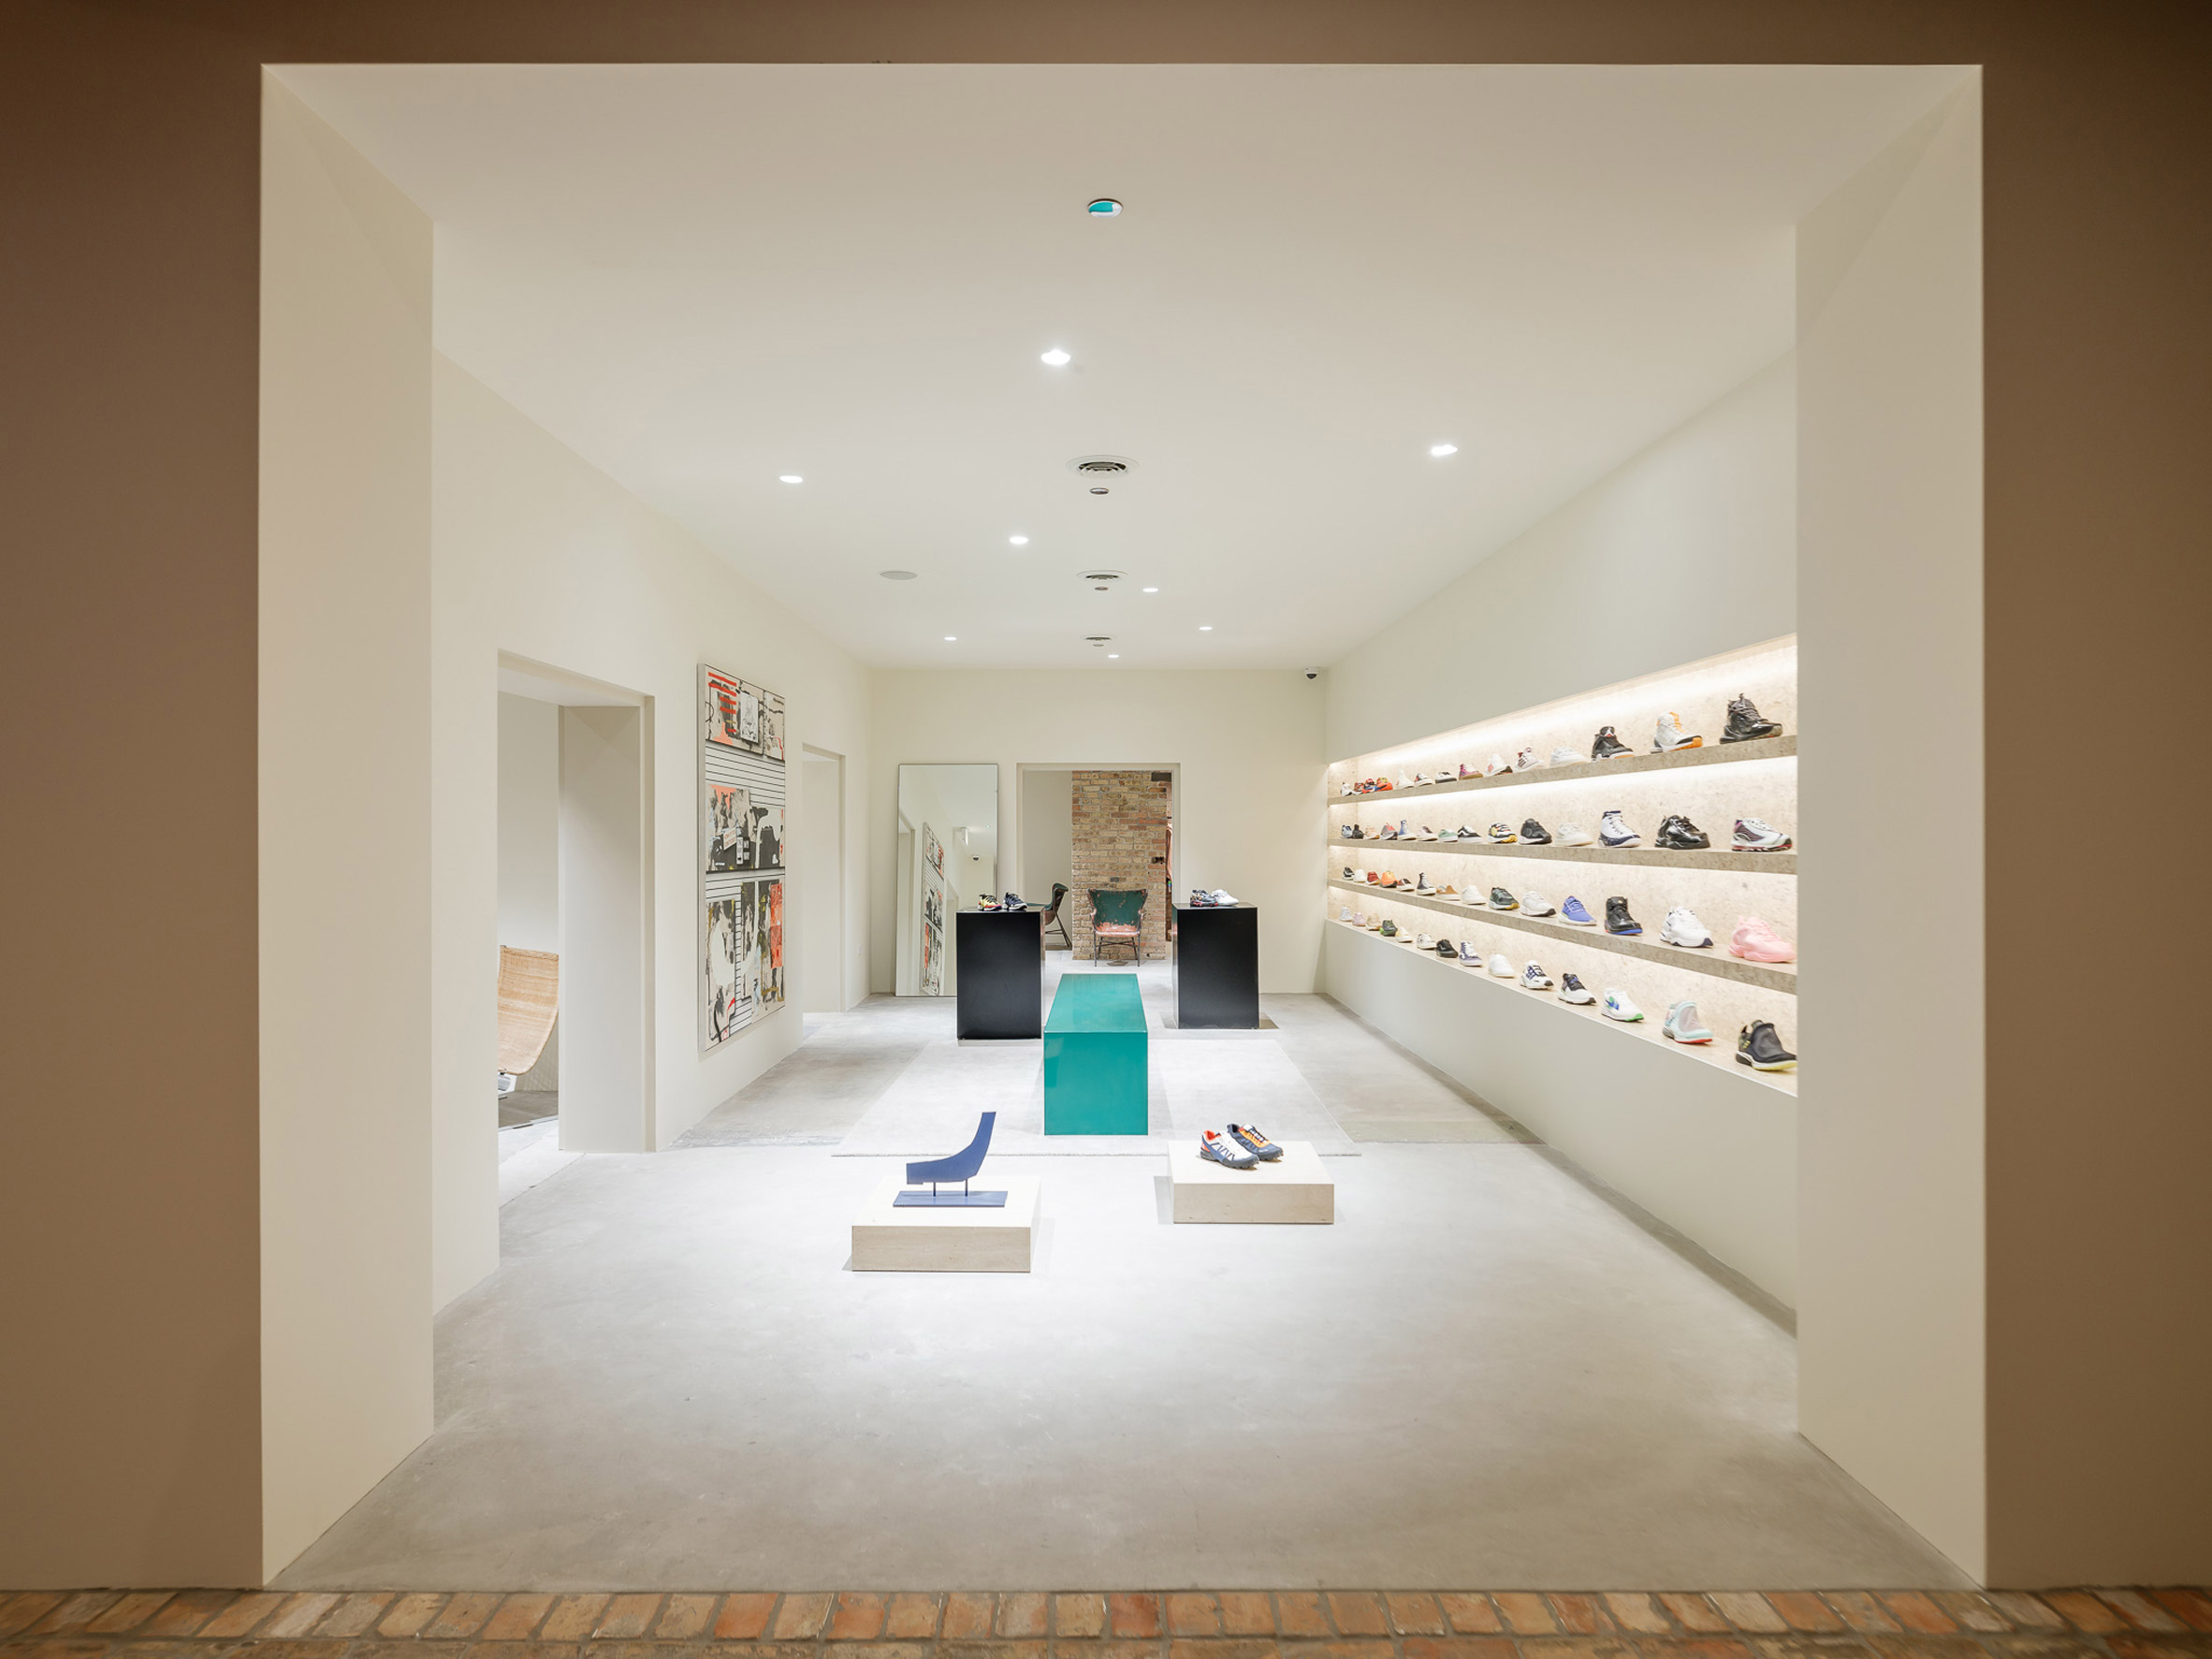 Cos, the Chic London Brand, Opens a Three-Story Boutique on Oak Street –  Chicago Magazine